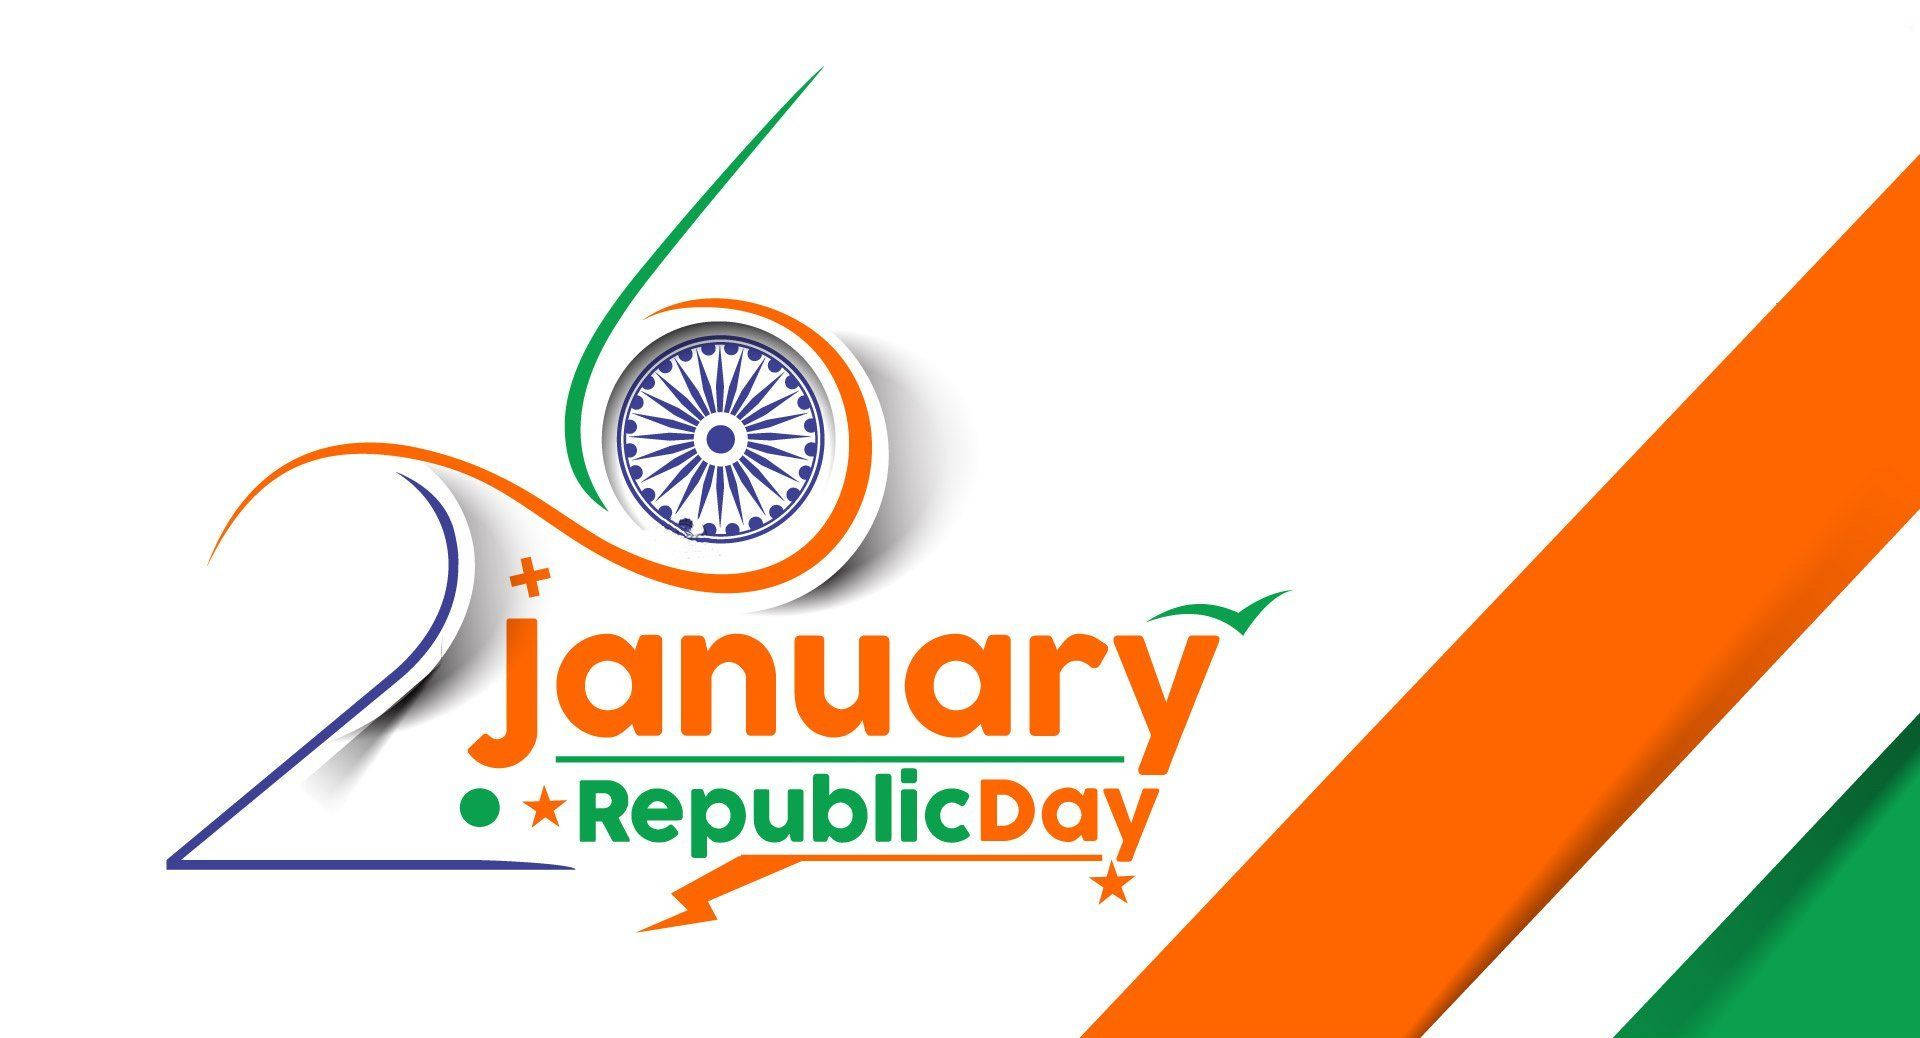 Simple India Republic Day 26 January Poster Design Wallpaper